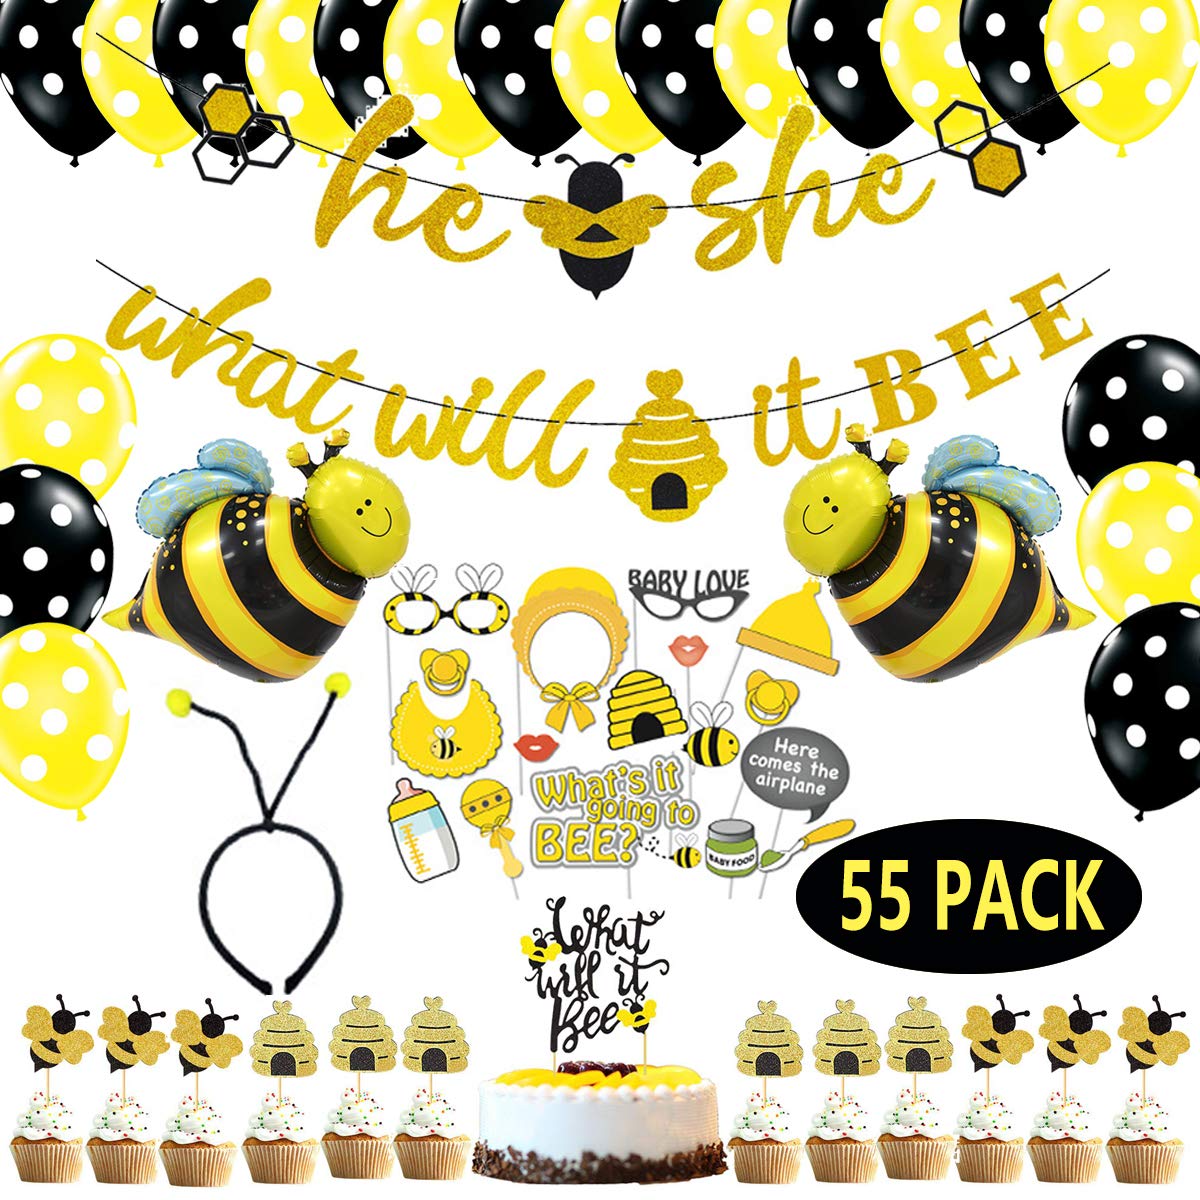 Book Cover What Will It Bee Gender Reveal Party Supplies, Bumble Bee Gender Reveal Decorations for Baby Shower, Bumble Bee Banner Balloon Honeycomb Bee Cake Toppers Bee Headband for Baby Reveal Party